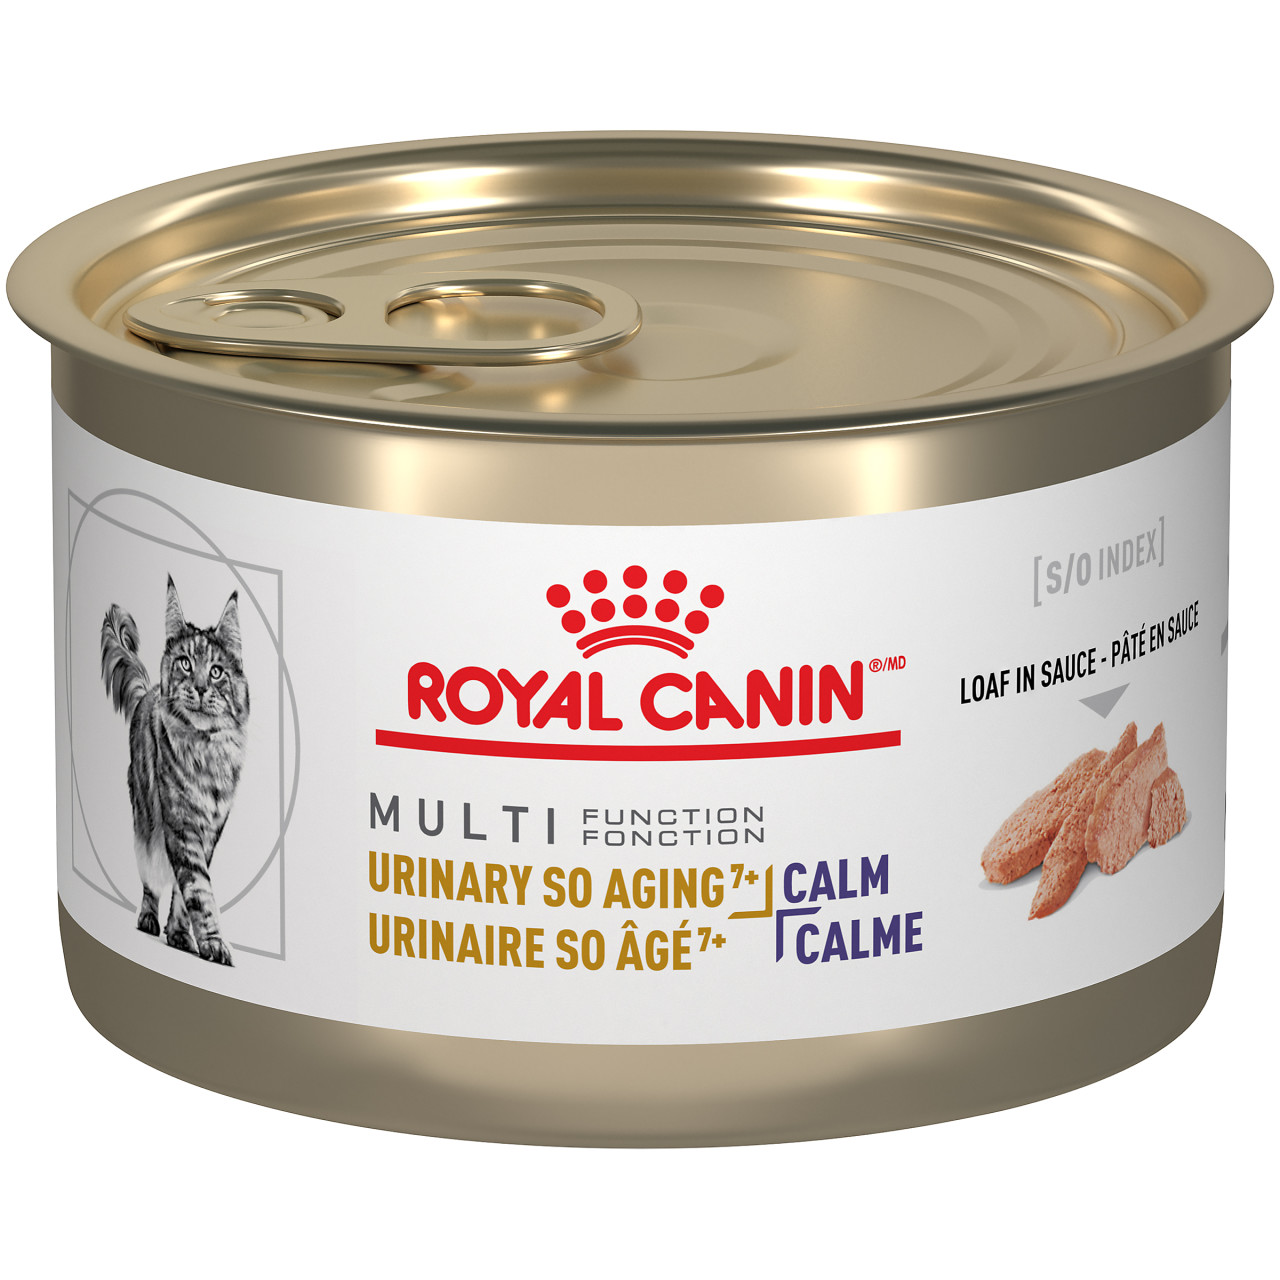 Feline Urinary SO® Aging 7+ + Calm Canned Cat Food